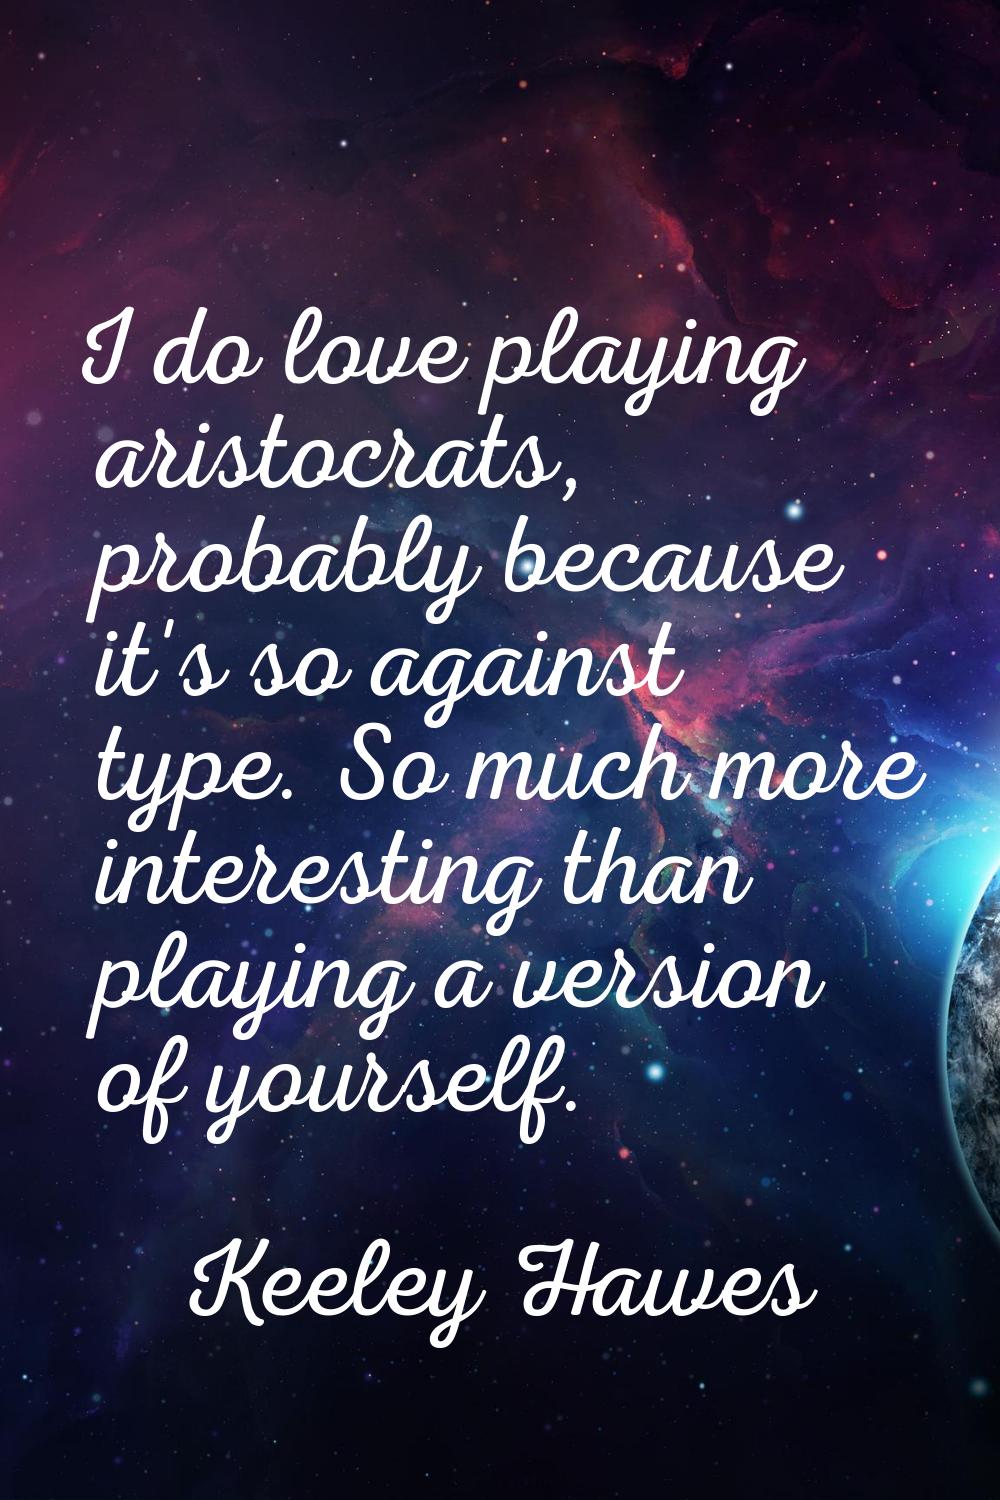 I do love playing aristocrats, probably because it's so against type. So much more interesting than